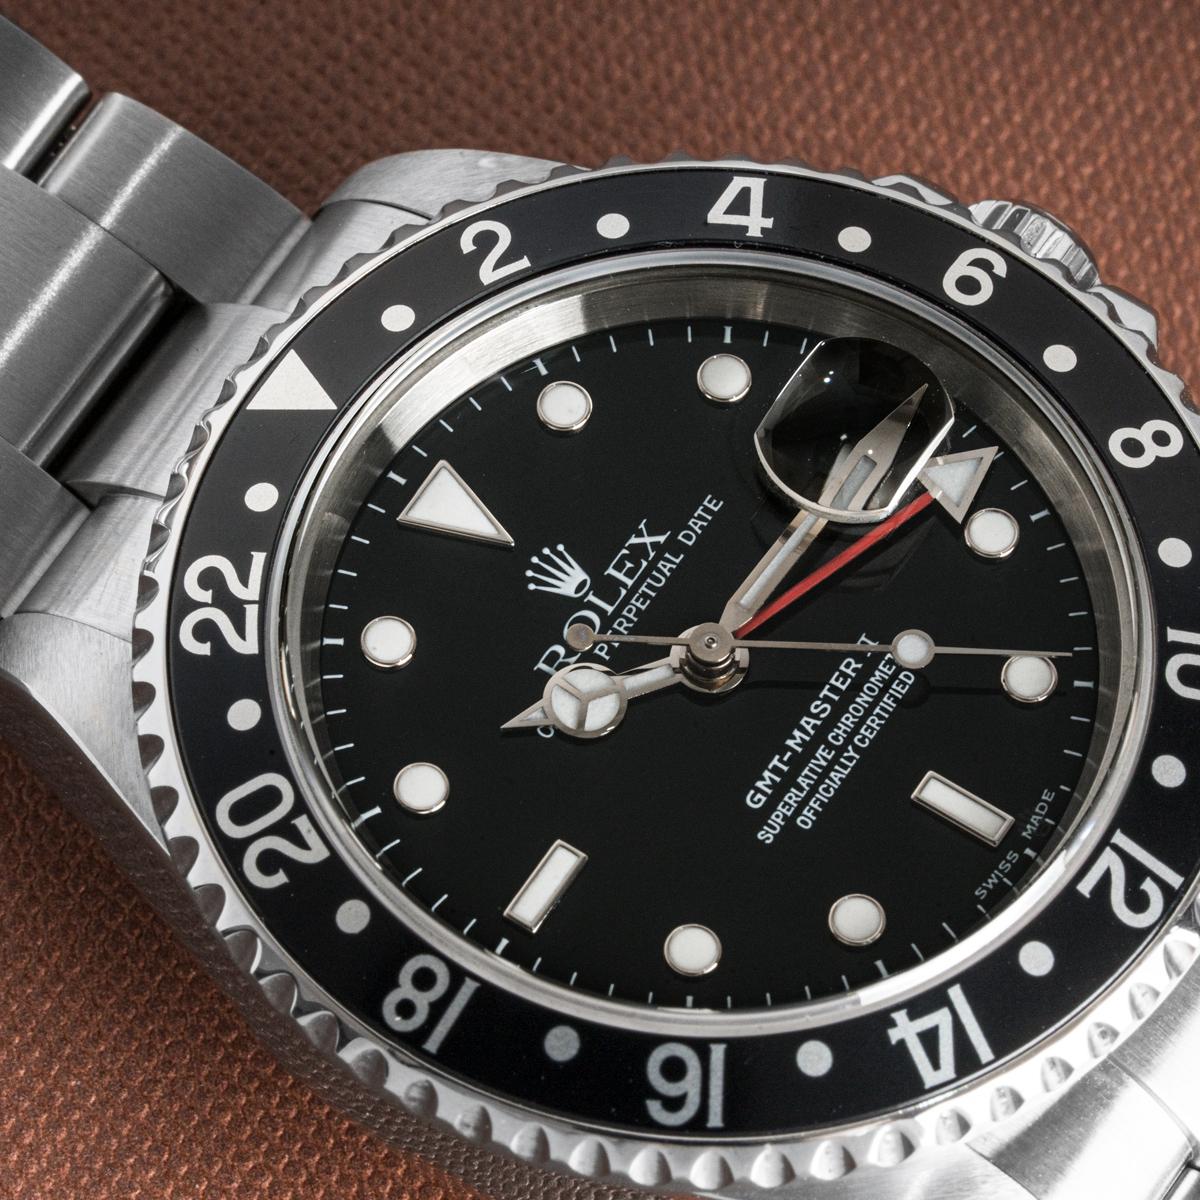 A stainless steel GMT-Master II by Rolex. Featuring a black dial with a date aperture as well as a red second-time zone hand. The bidirectional rotatable bezel also features a 24-hour display.

The watch is fitted with a sapphire crystal, a